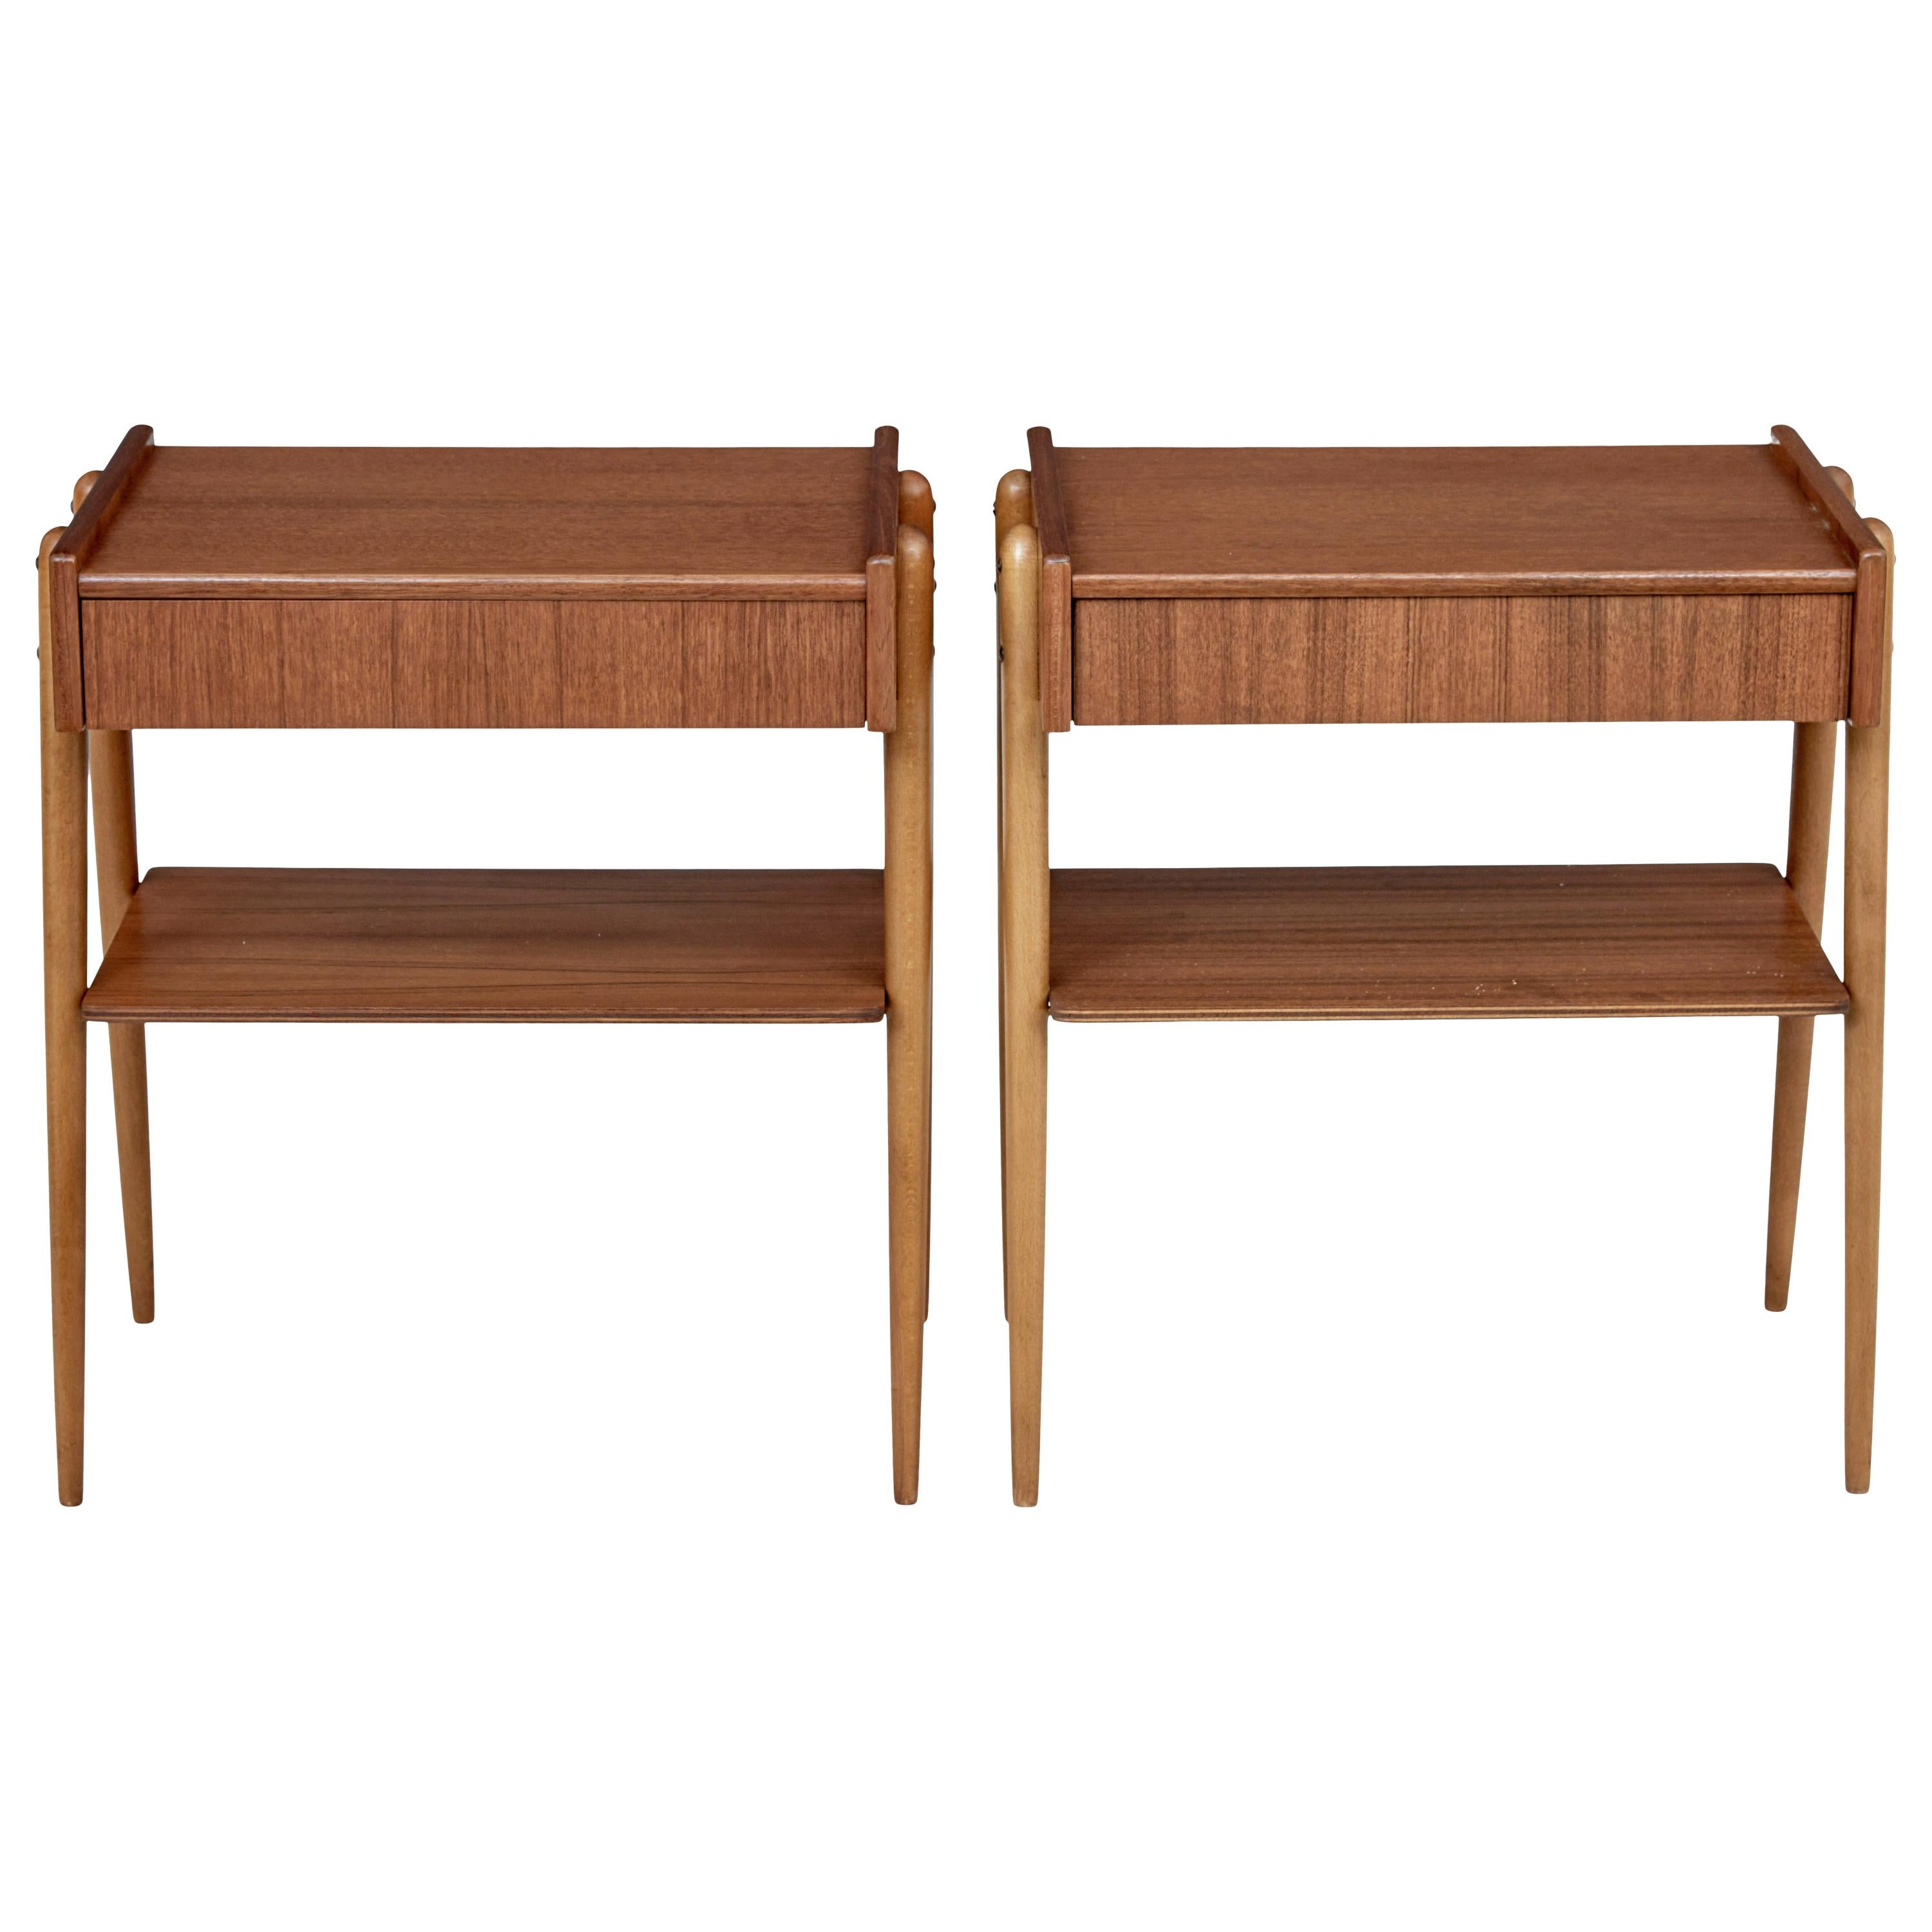 Pair of Mid-20th Century Teak Bedside Tables by Carlstrom & Co.